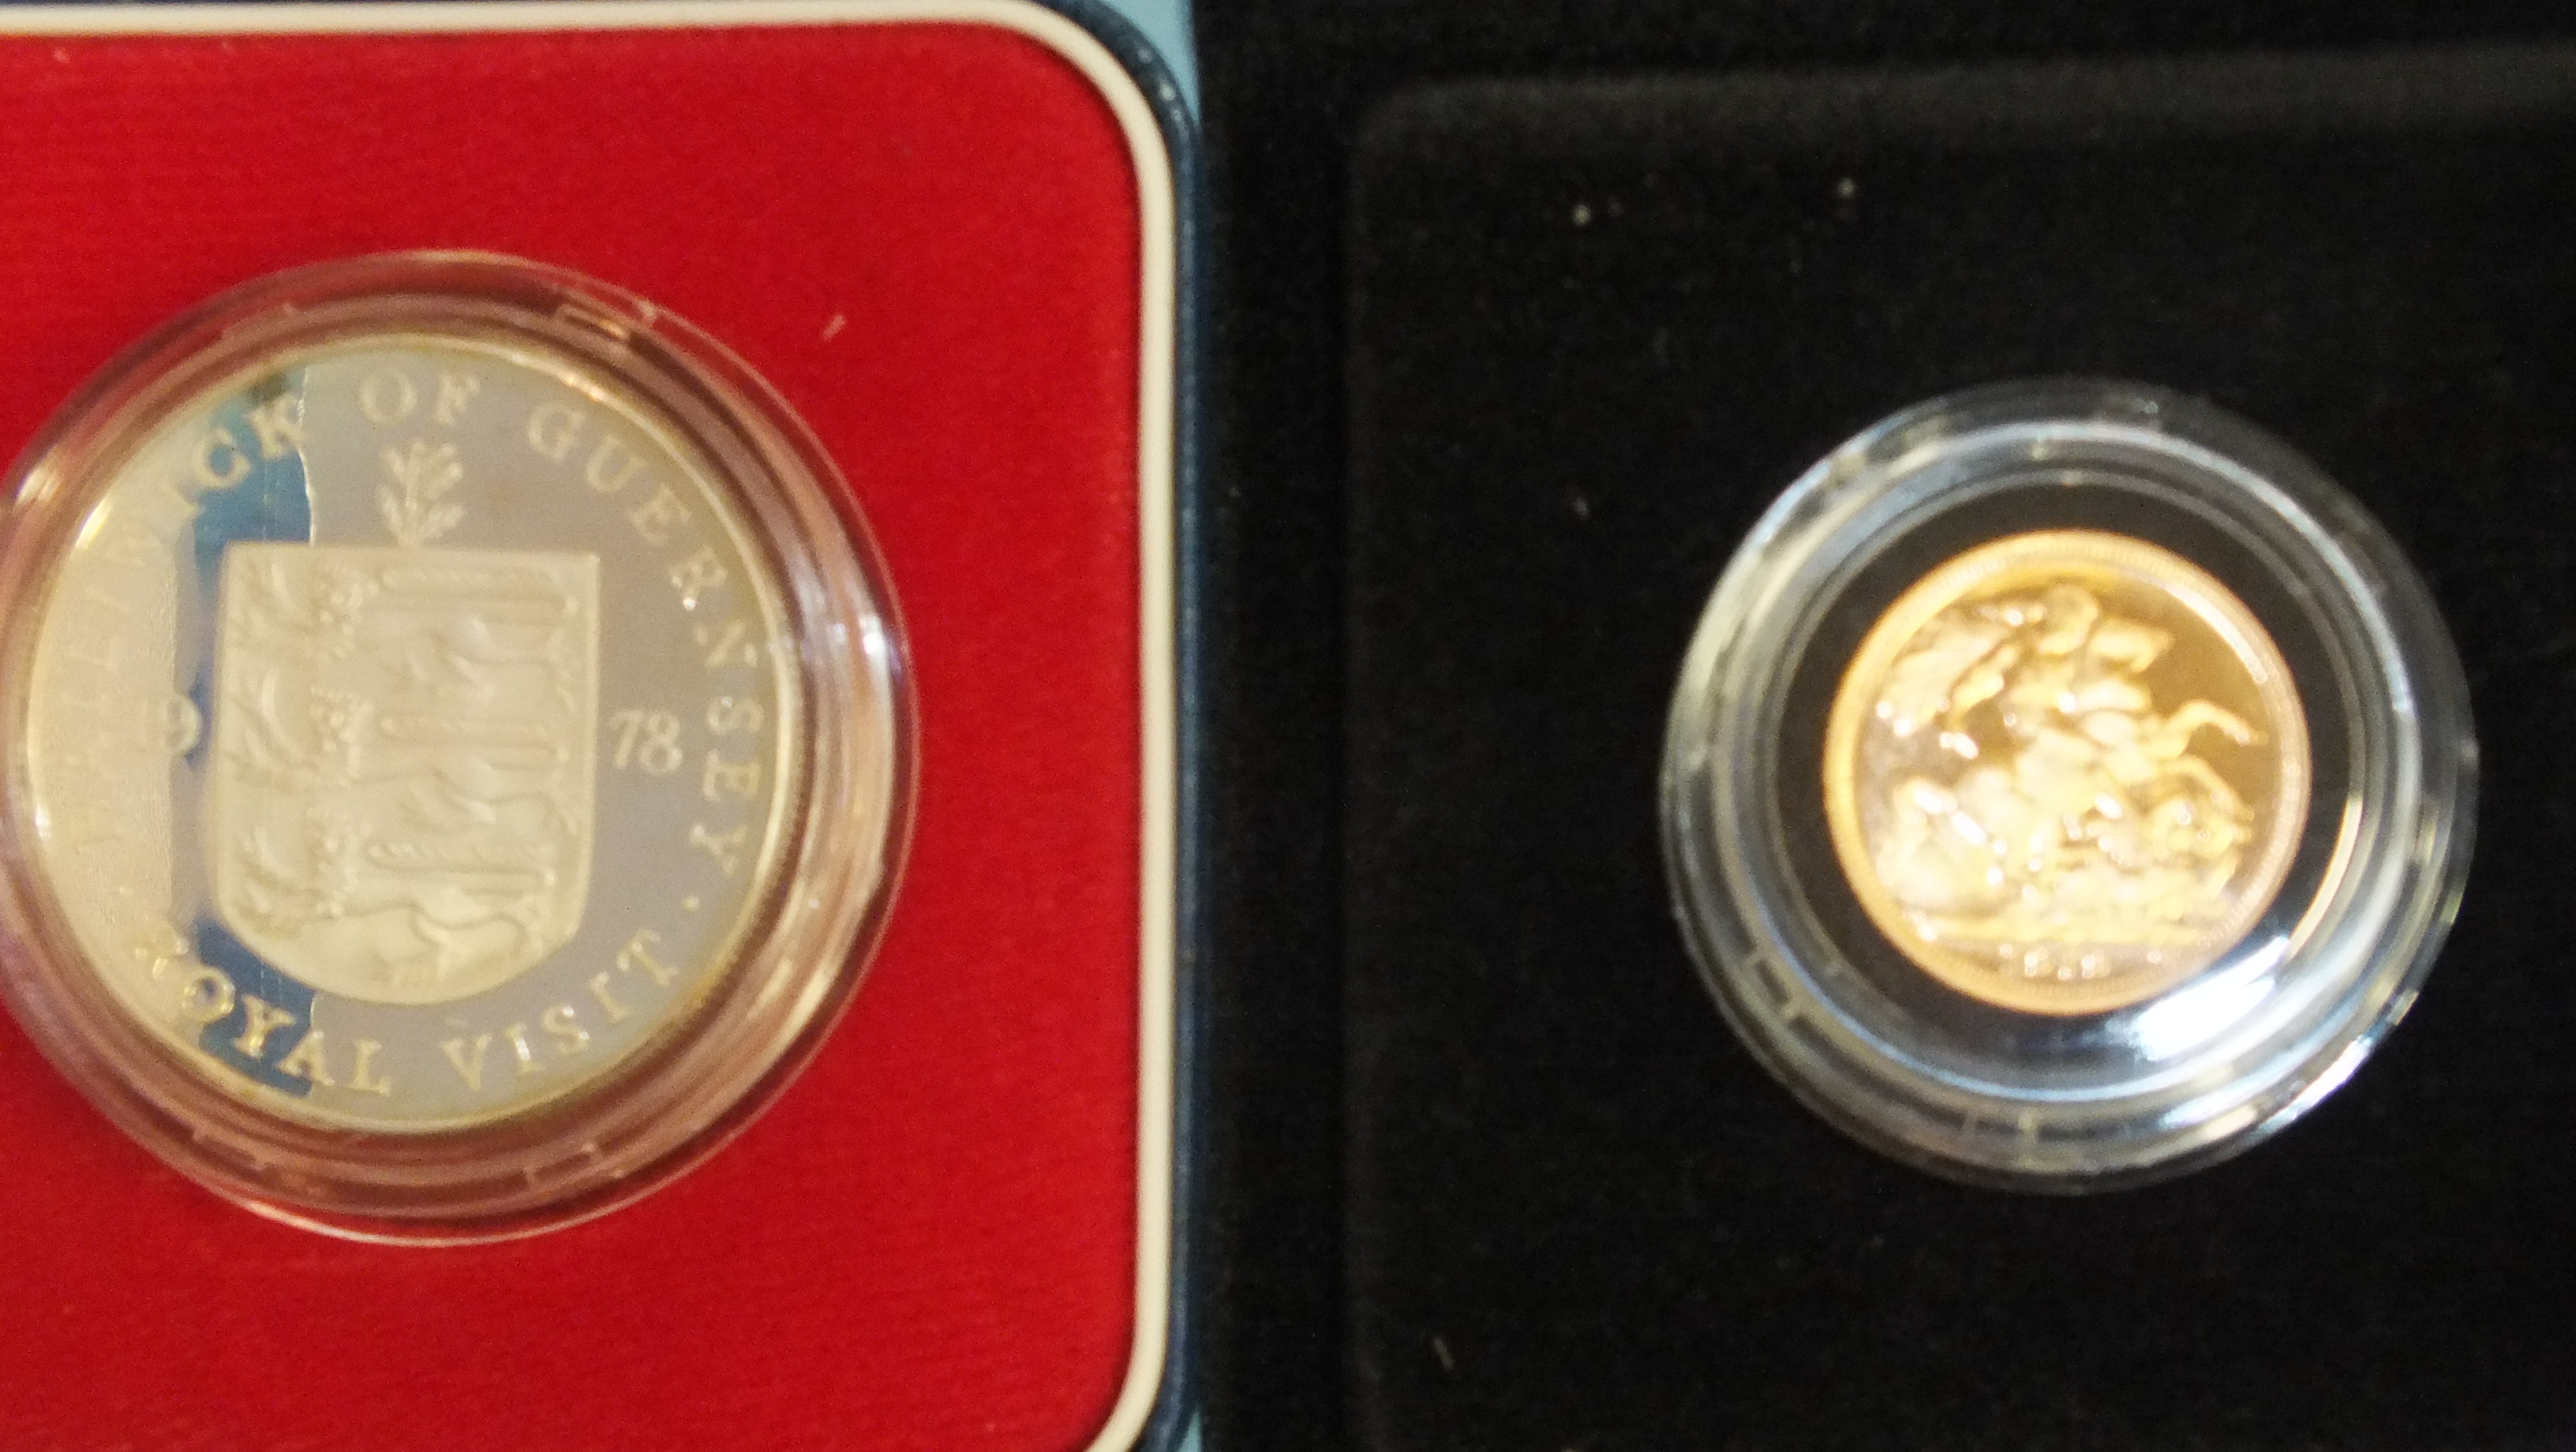 A 1979 proof sovereign in Royal Mint case and outer card box and a 1978 Balliwick of Guernsey